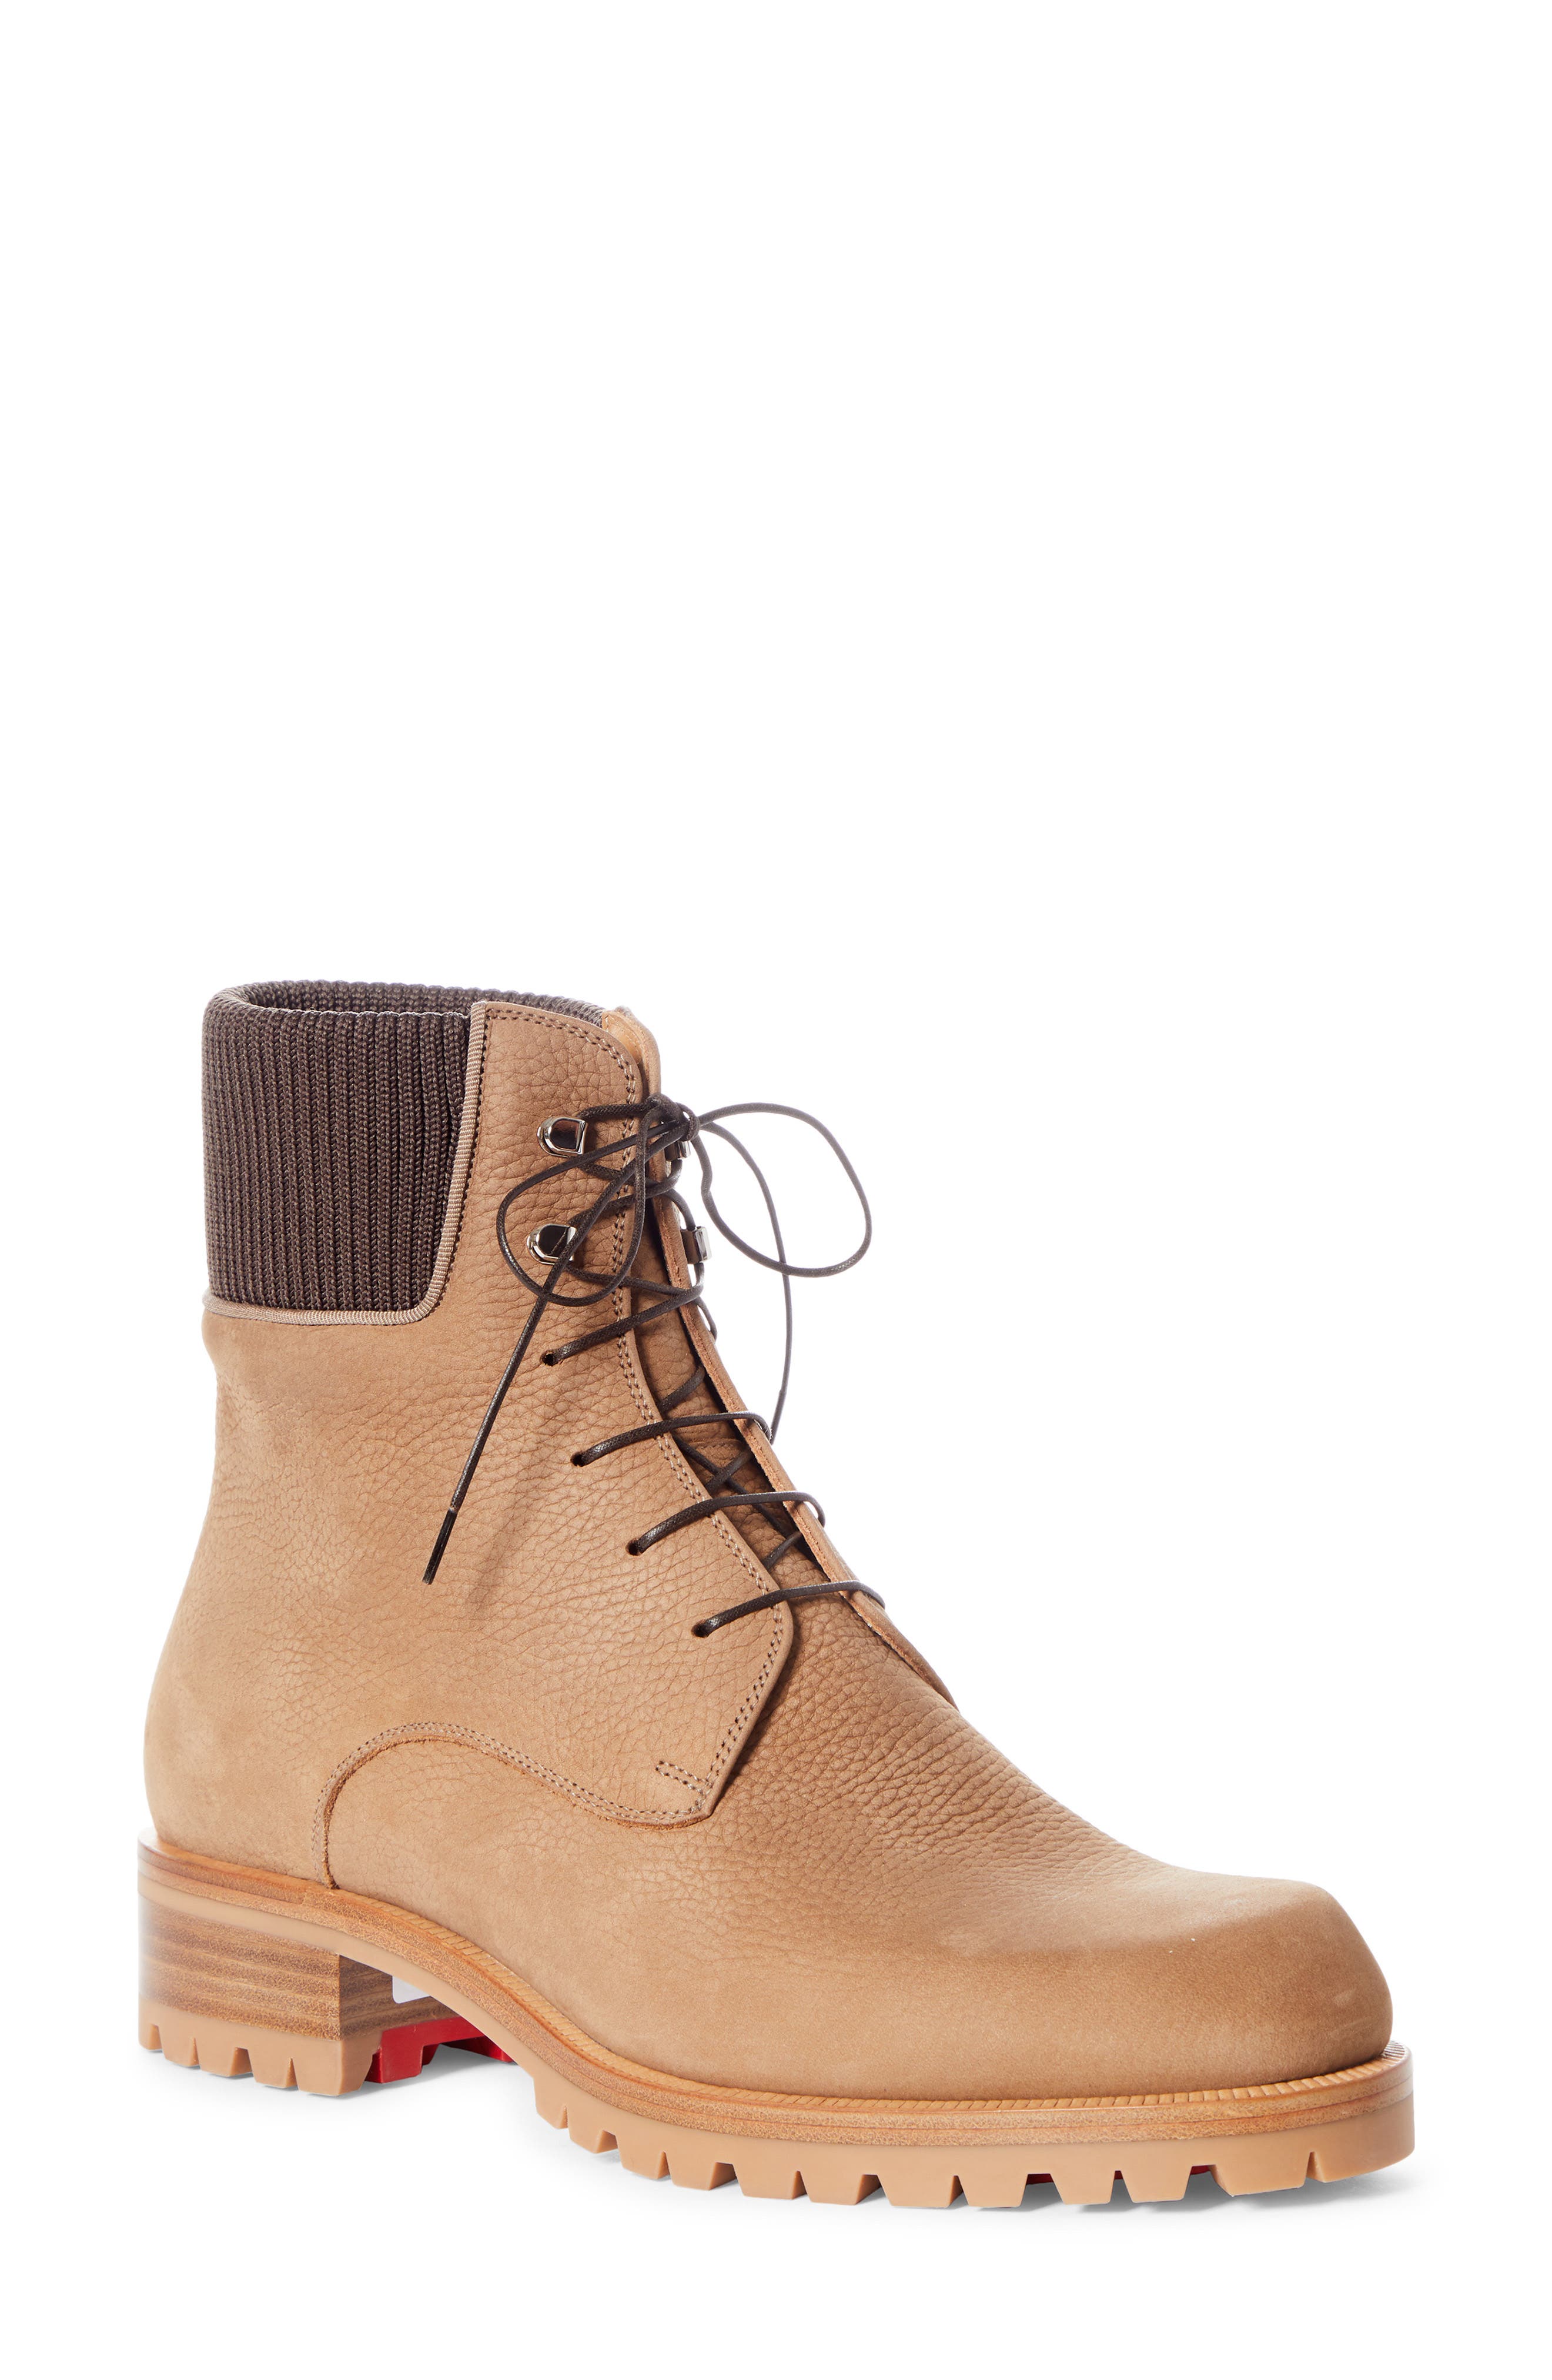 Mens Christian Louboutin Boots | Nordstrom